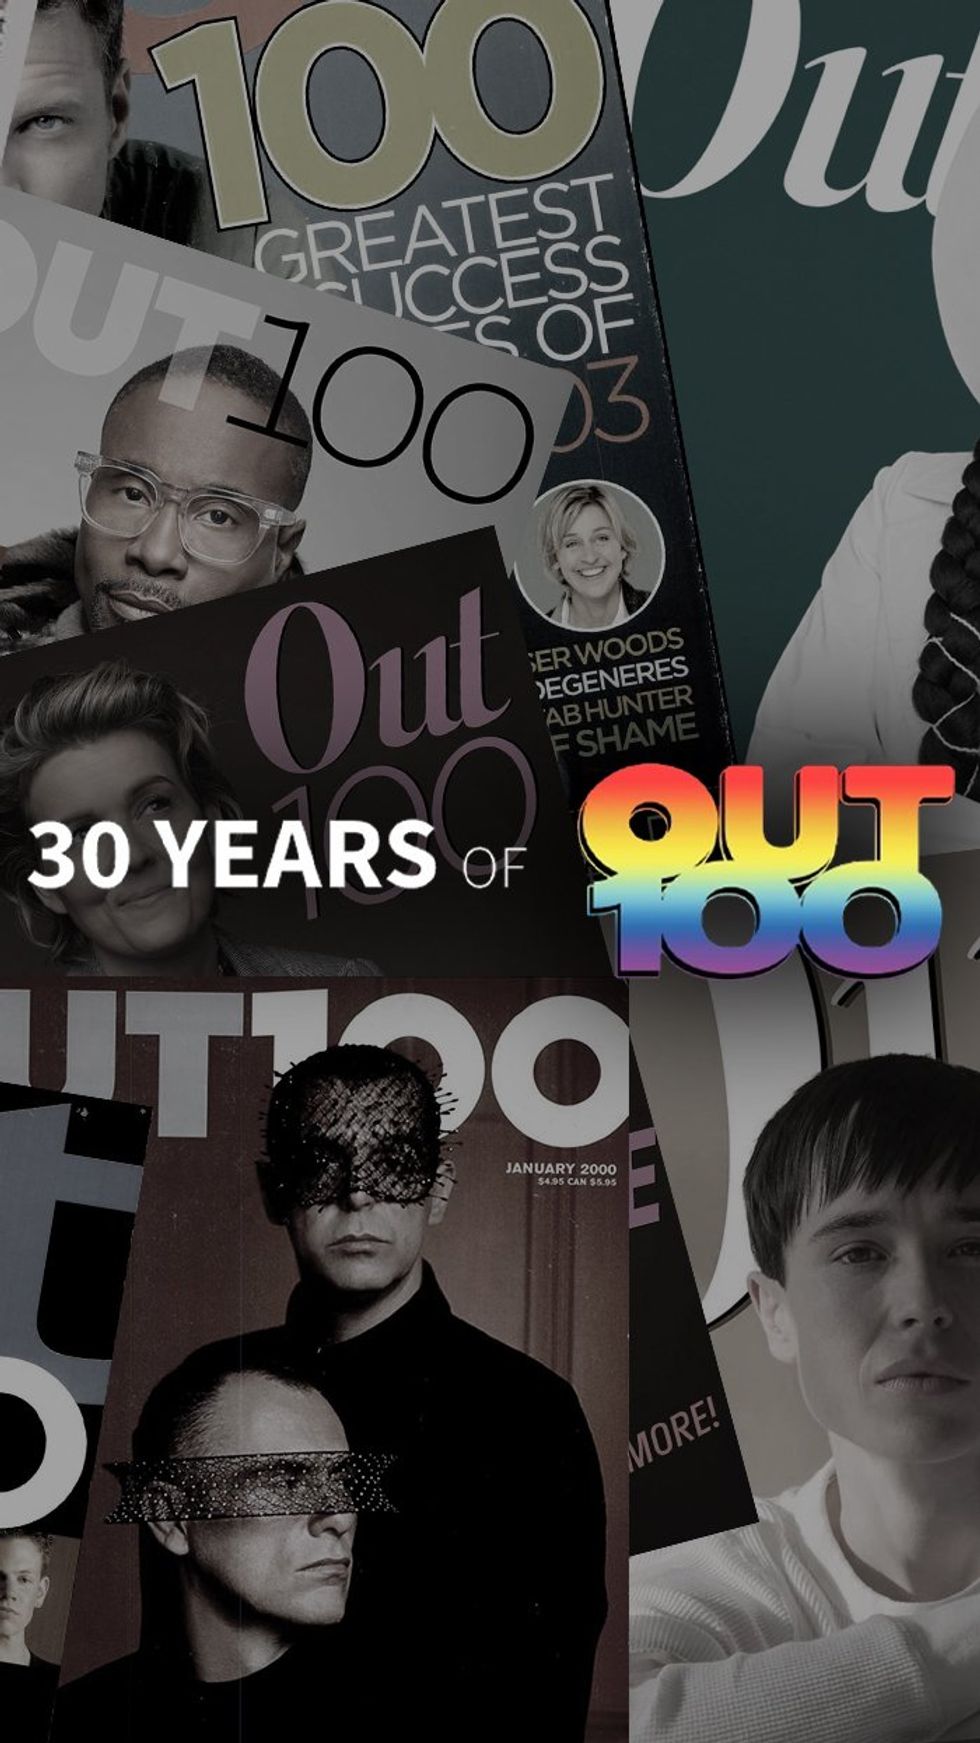 
Step into the Out100 Vault & celebrate 30 years of history-making LGBTQ+ folks!
